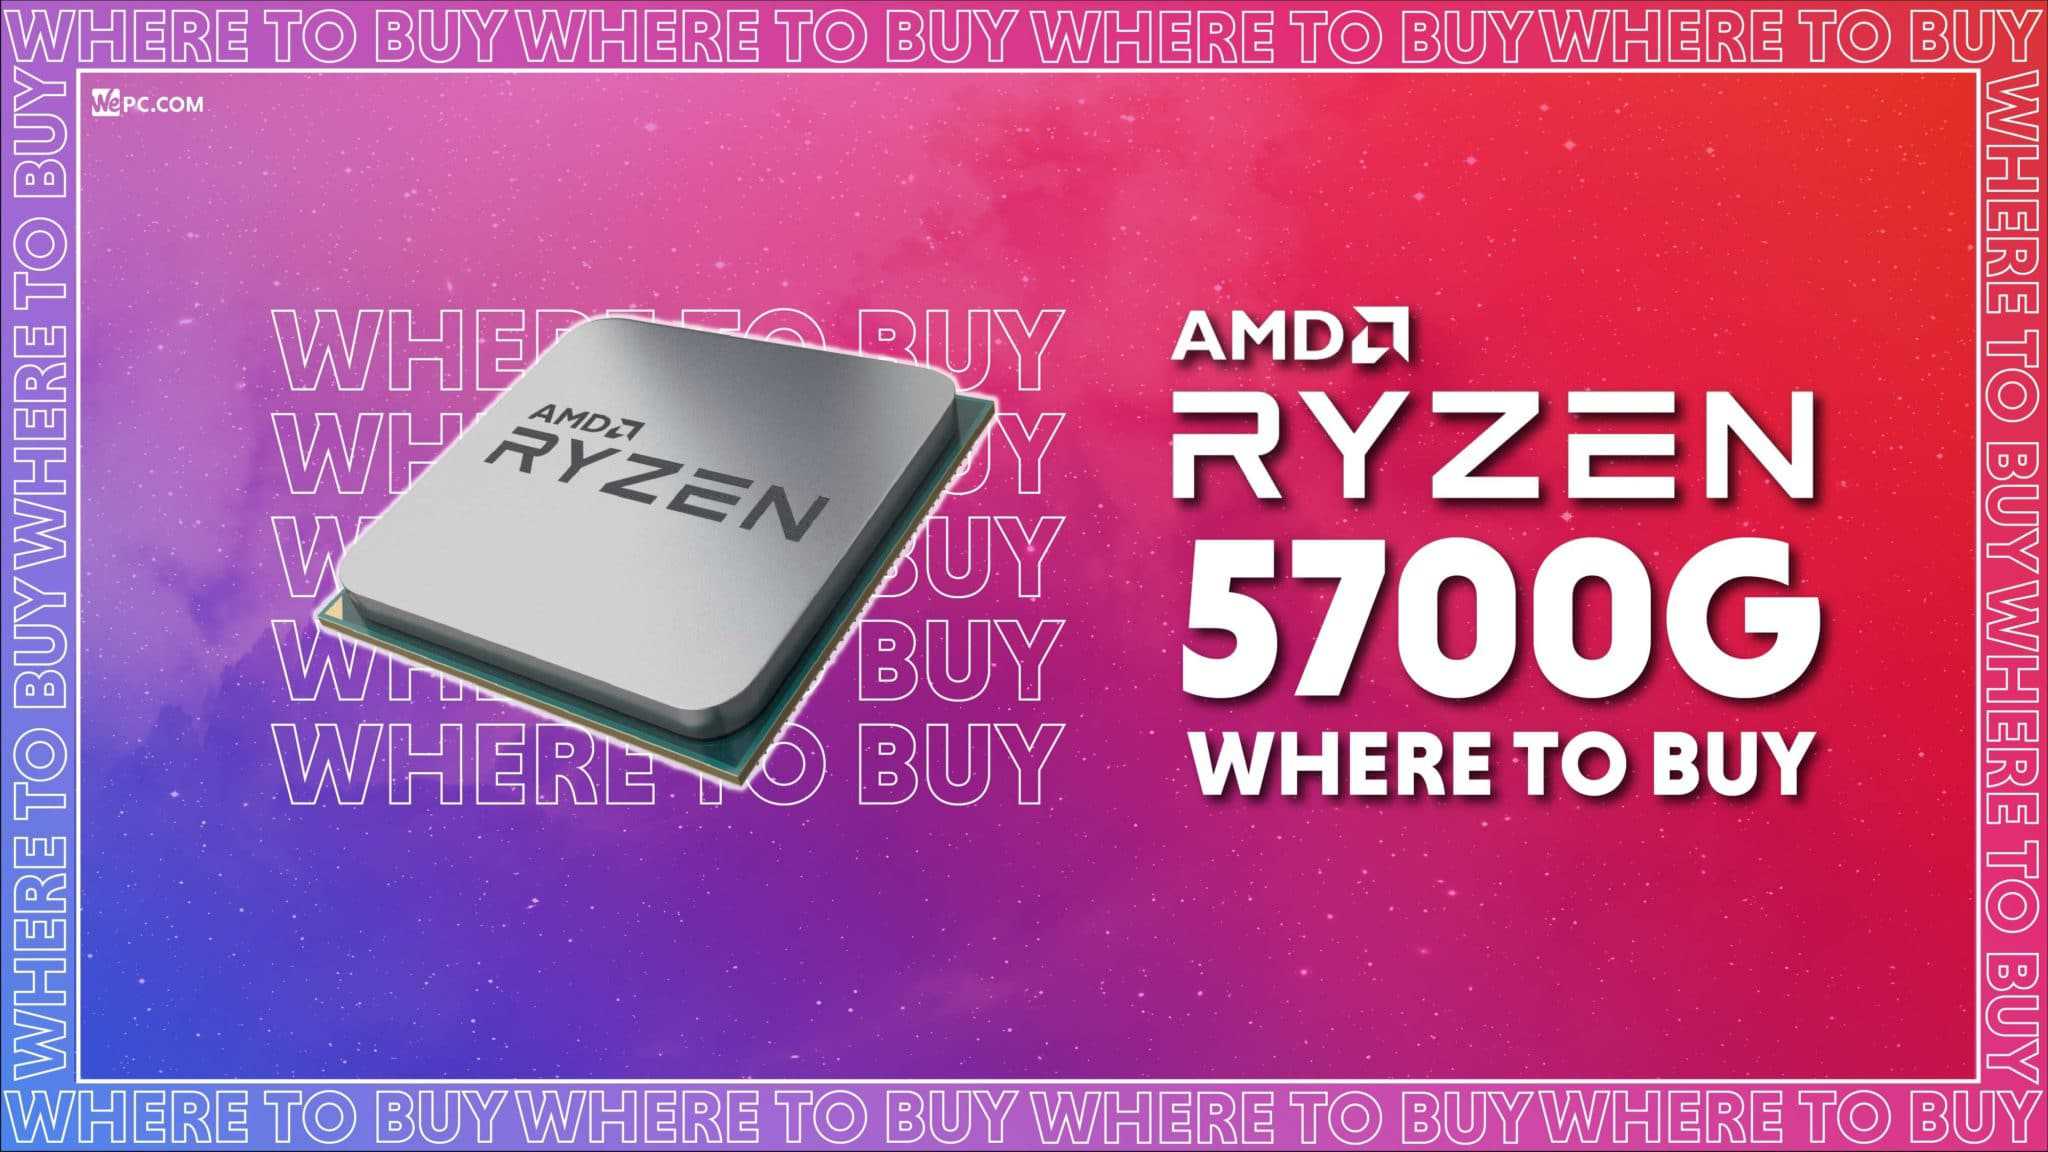 Where To Buy AMD Ryzen 7 5700G : Release Date, Price, & Pre Order 